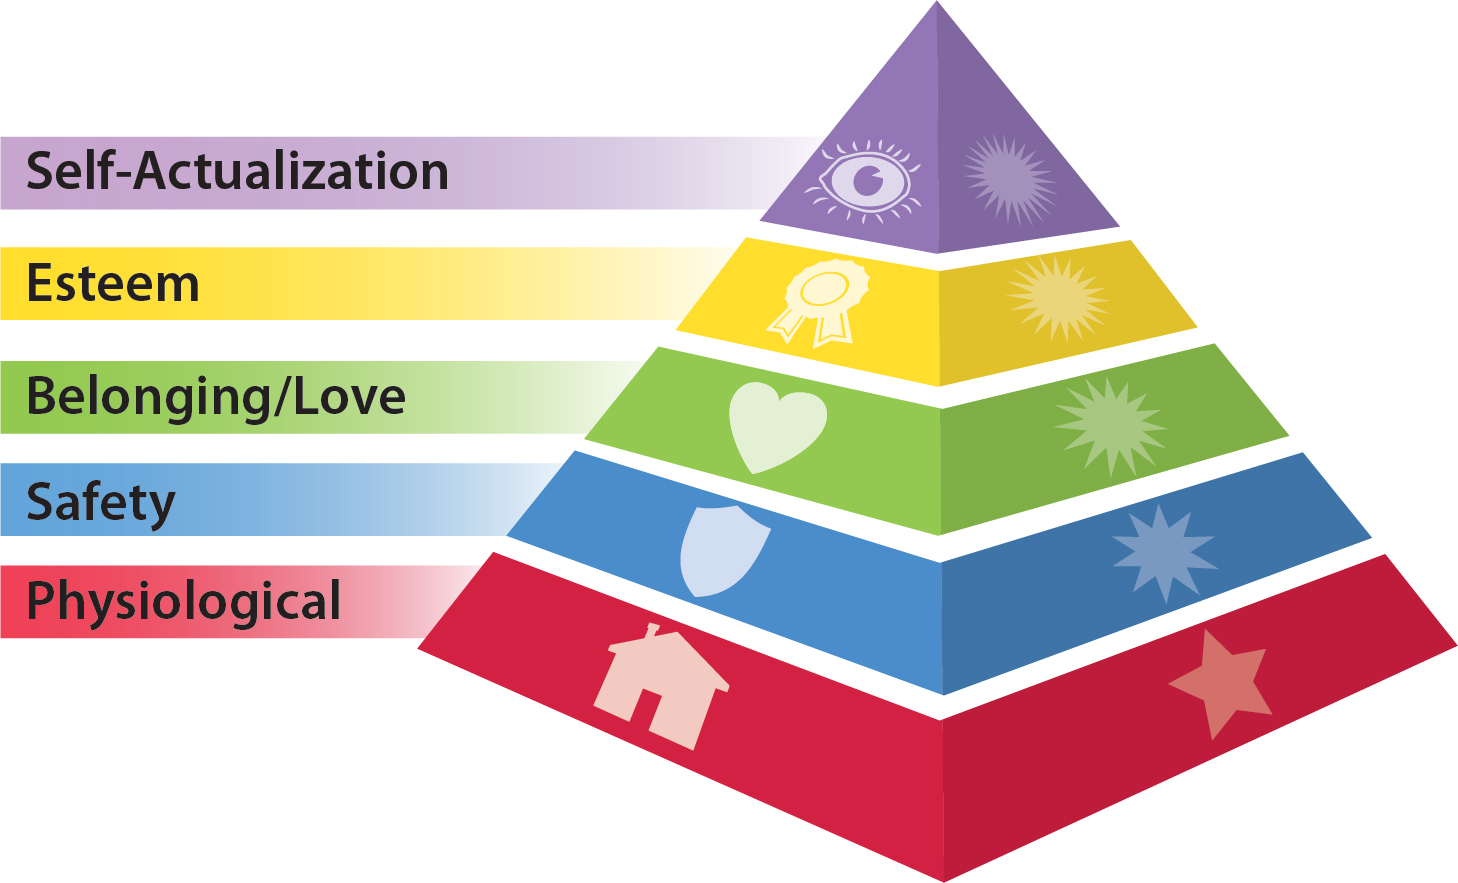 3-dimentional pyramid divided into 5 sections. The base fo the pyramid is categorized as "Physiological." The next layer above that is "Safety." The middle section is "Belonging/Love." The next layer above that is "Esteem" and the top of the pyramid categorizes "Self-Actualization."